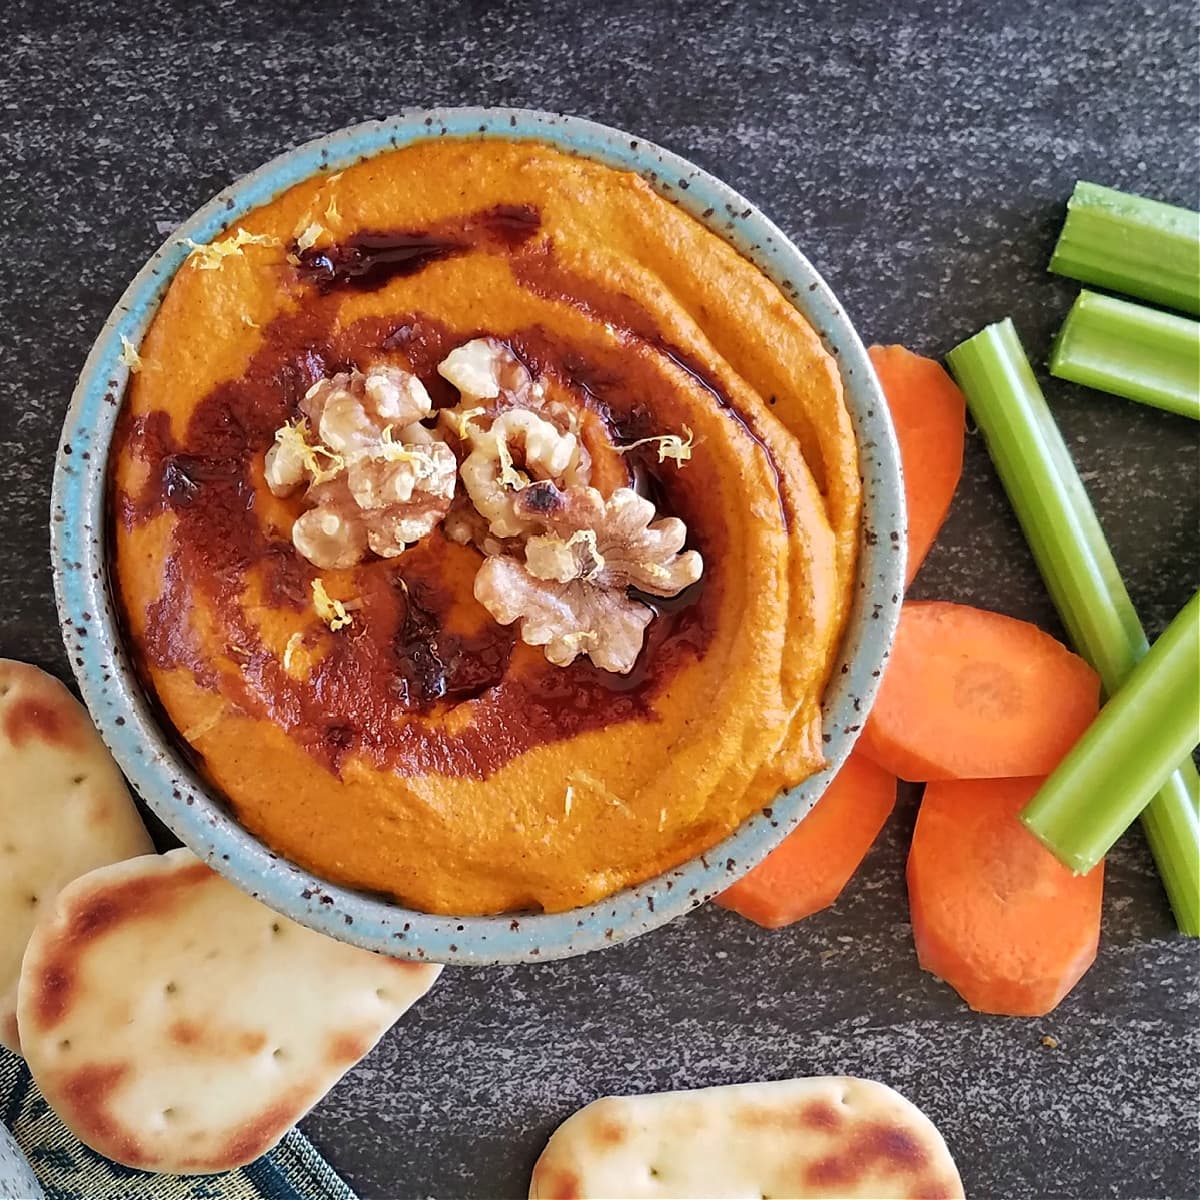 Small bowl of muhammara dip, drizzled with pomegranante molasses, garnished with whole walnuts, surrounded by small pitas, carrot coins, and celery sticks. 